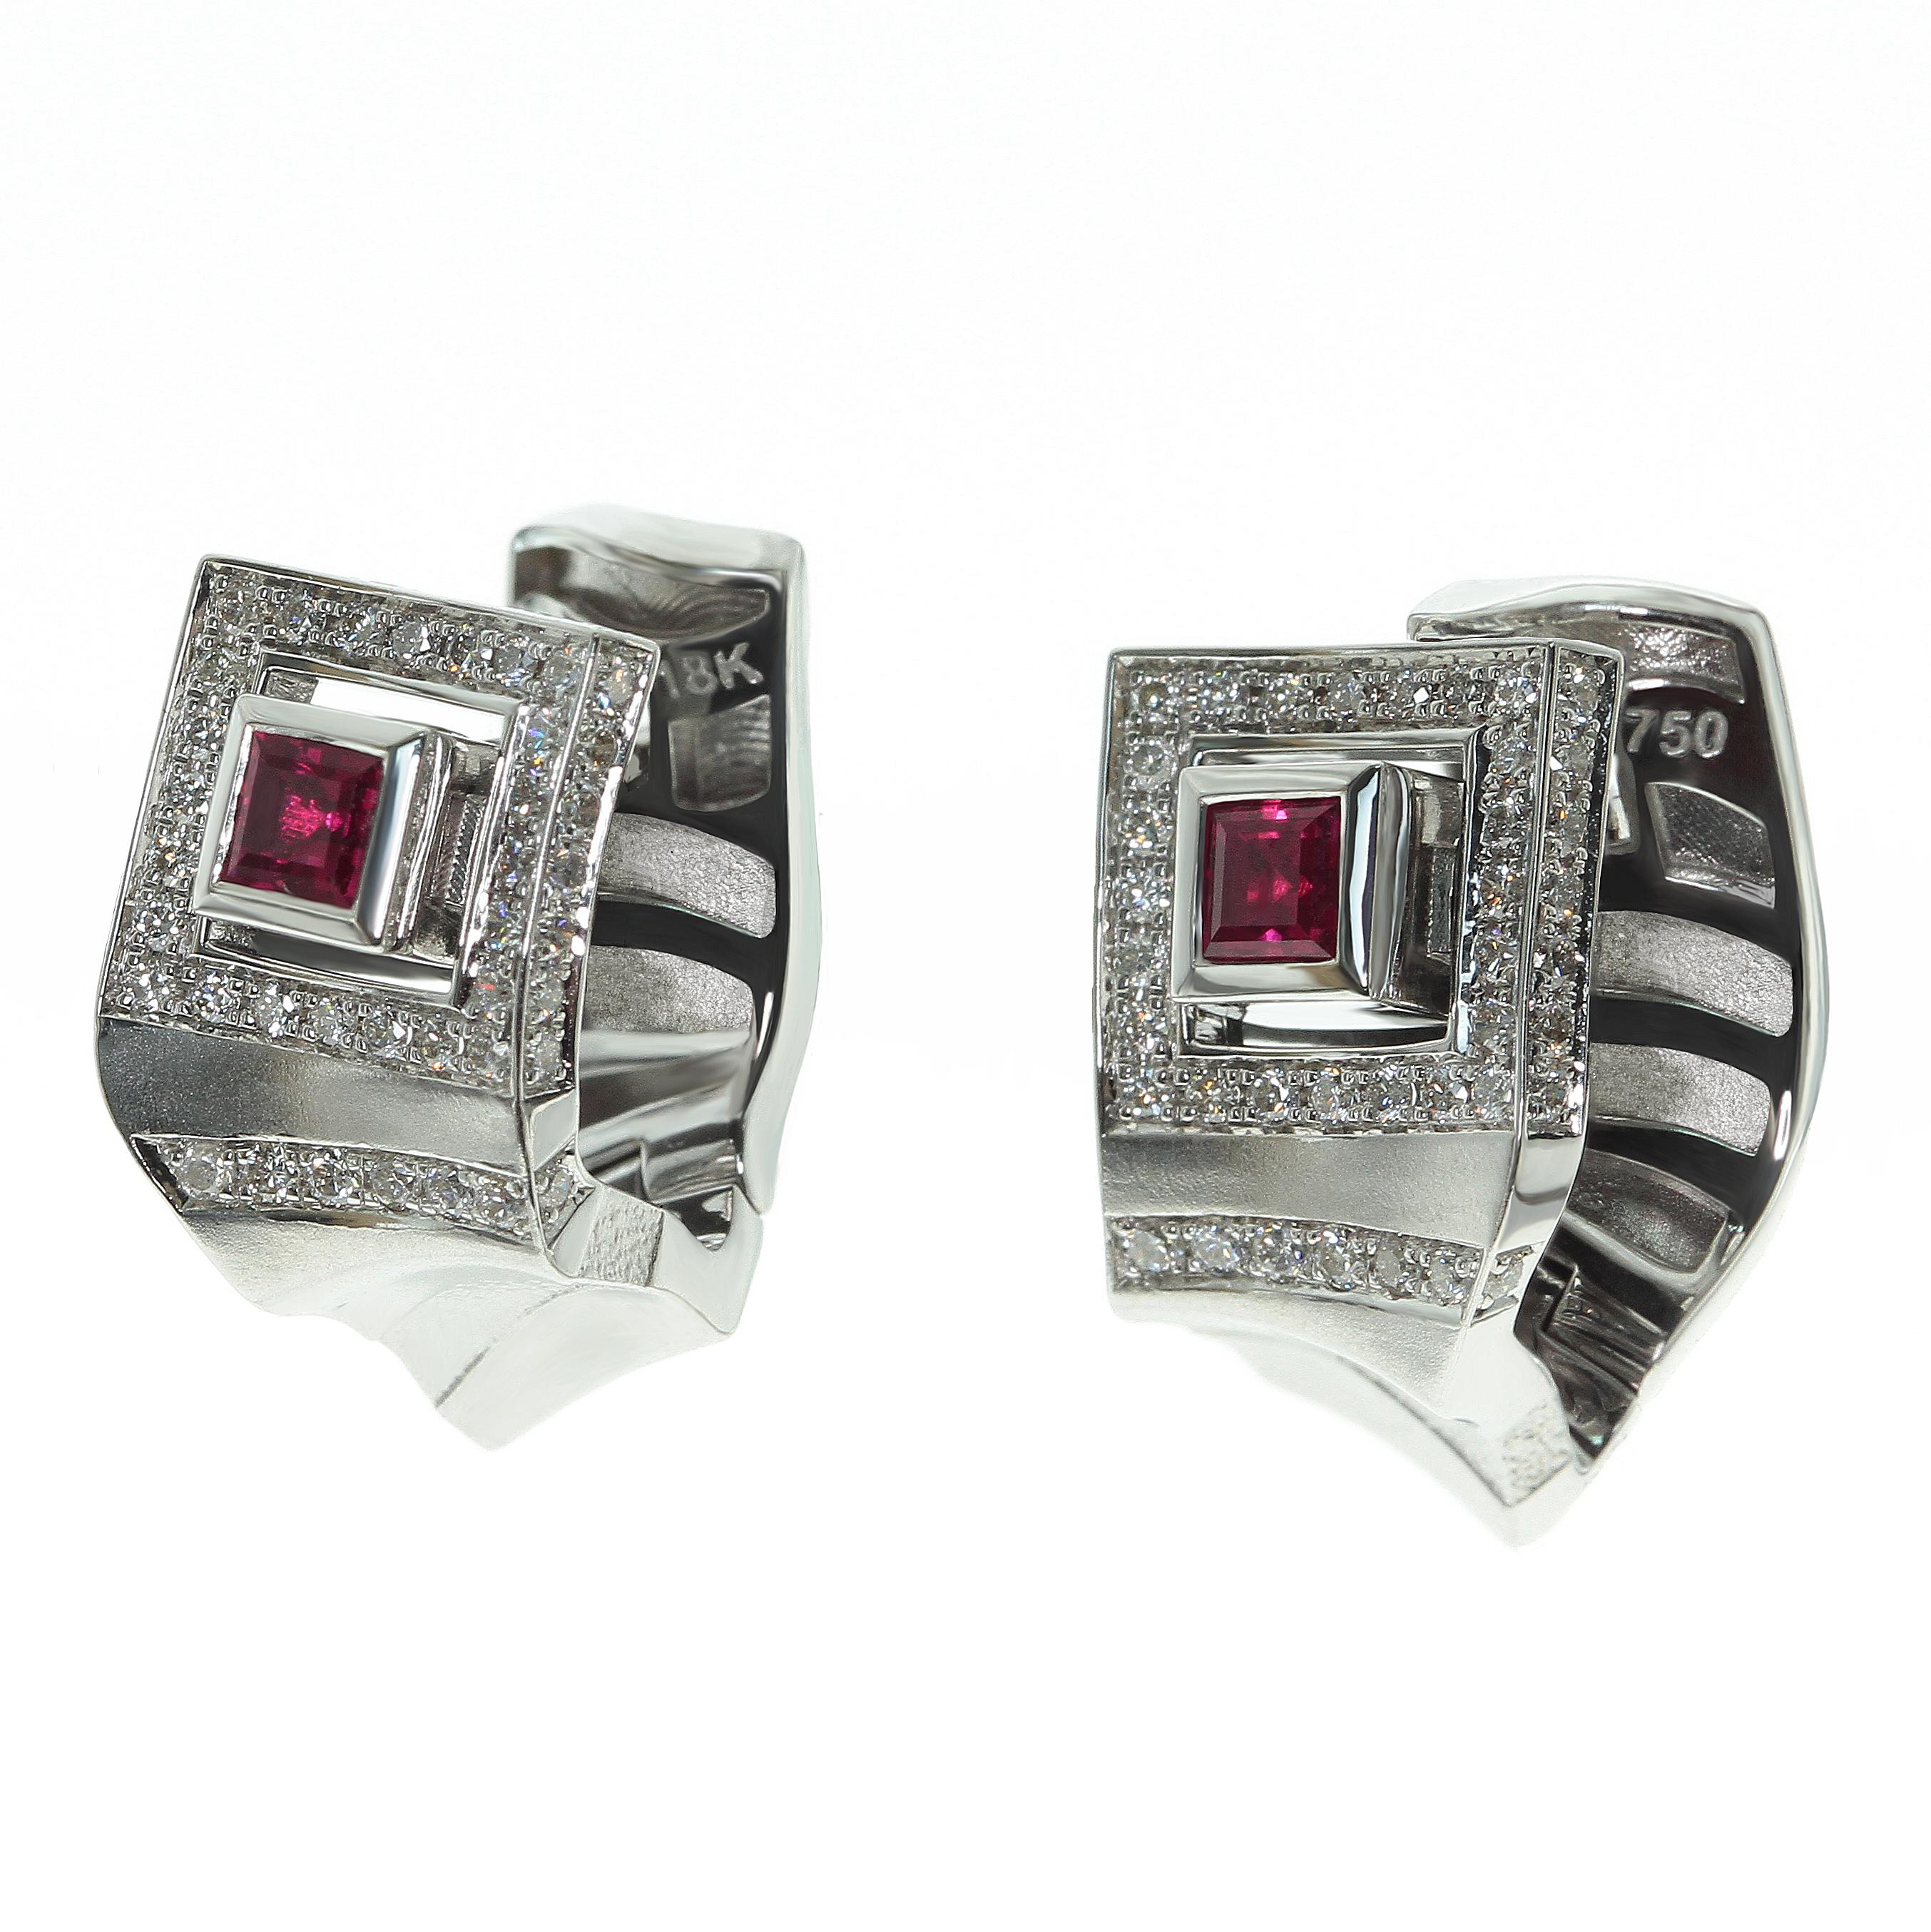 Art Deco Style Ruby Diamonds 18 Karat White Gold Earrings

For those who appreciate Art Deco style: straight lines and authentic finishing.
Ruby and Diamonds in White Gold - an always winning combination.
This earrings are perfect for day to day